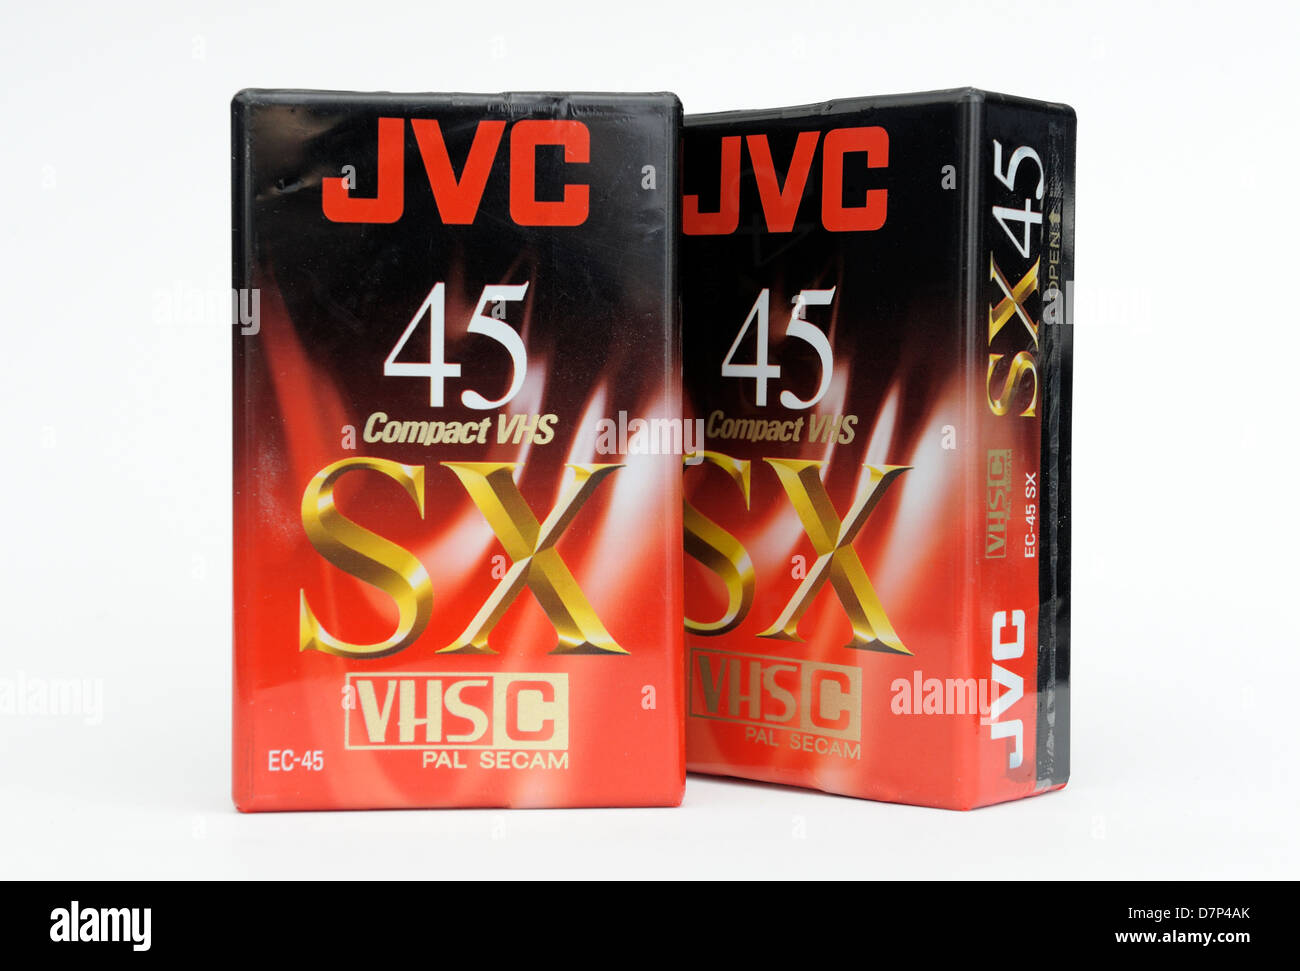 JVC 45 minute compact VHS C pal secam video tapes Stock Photo